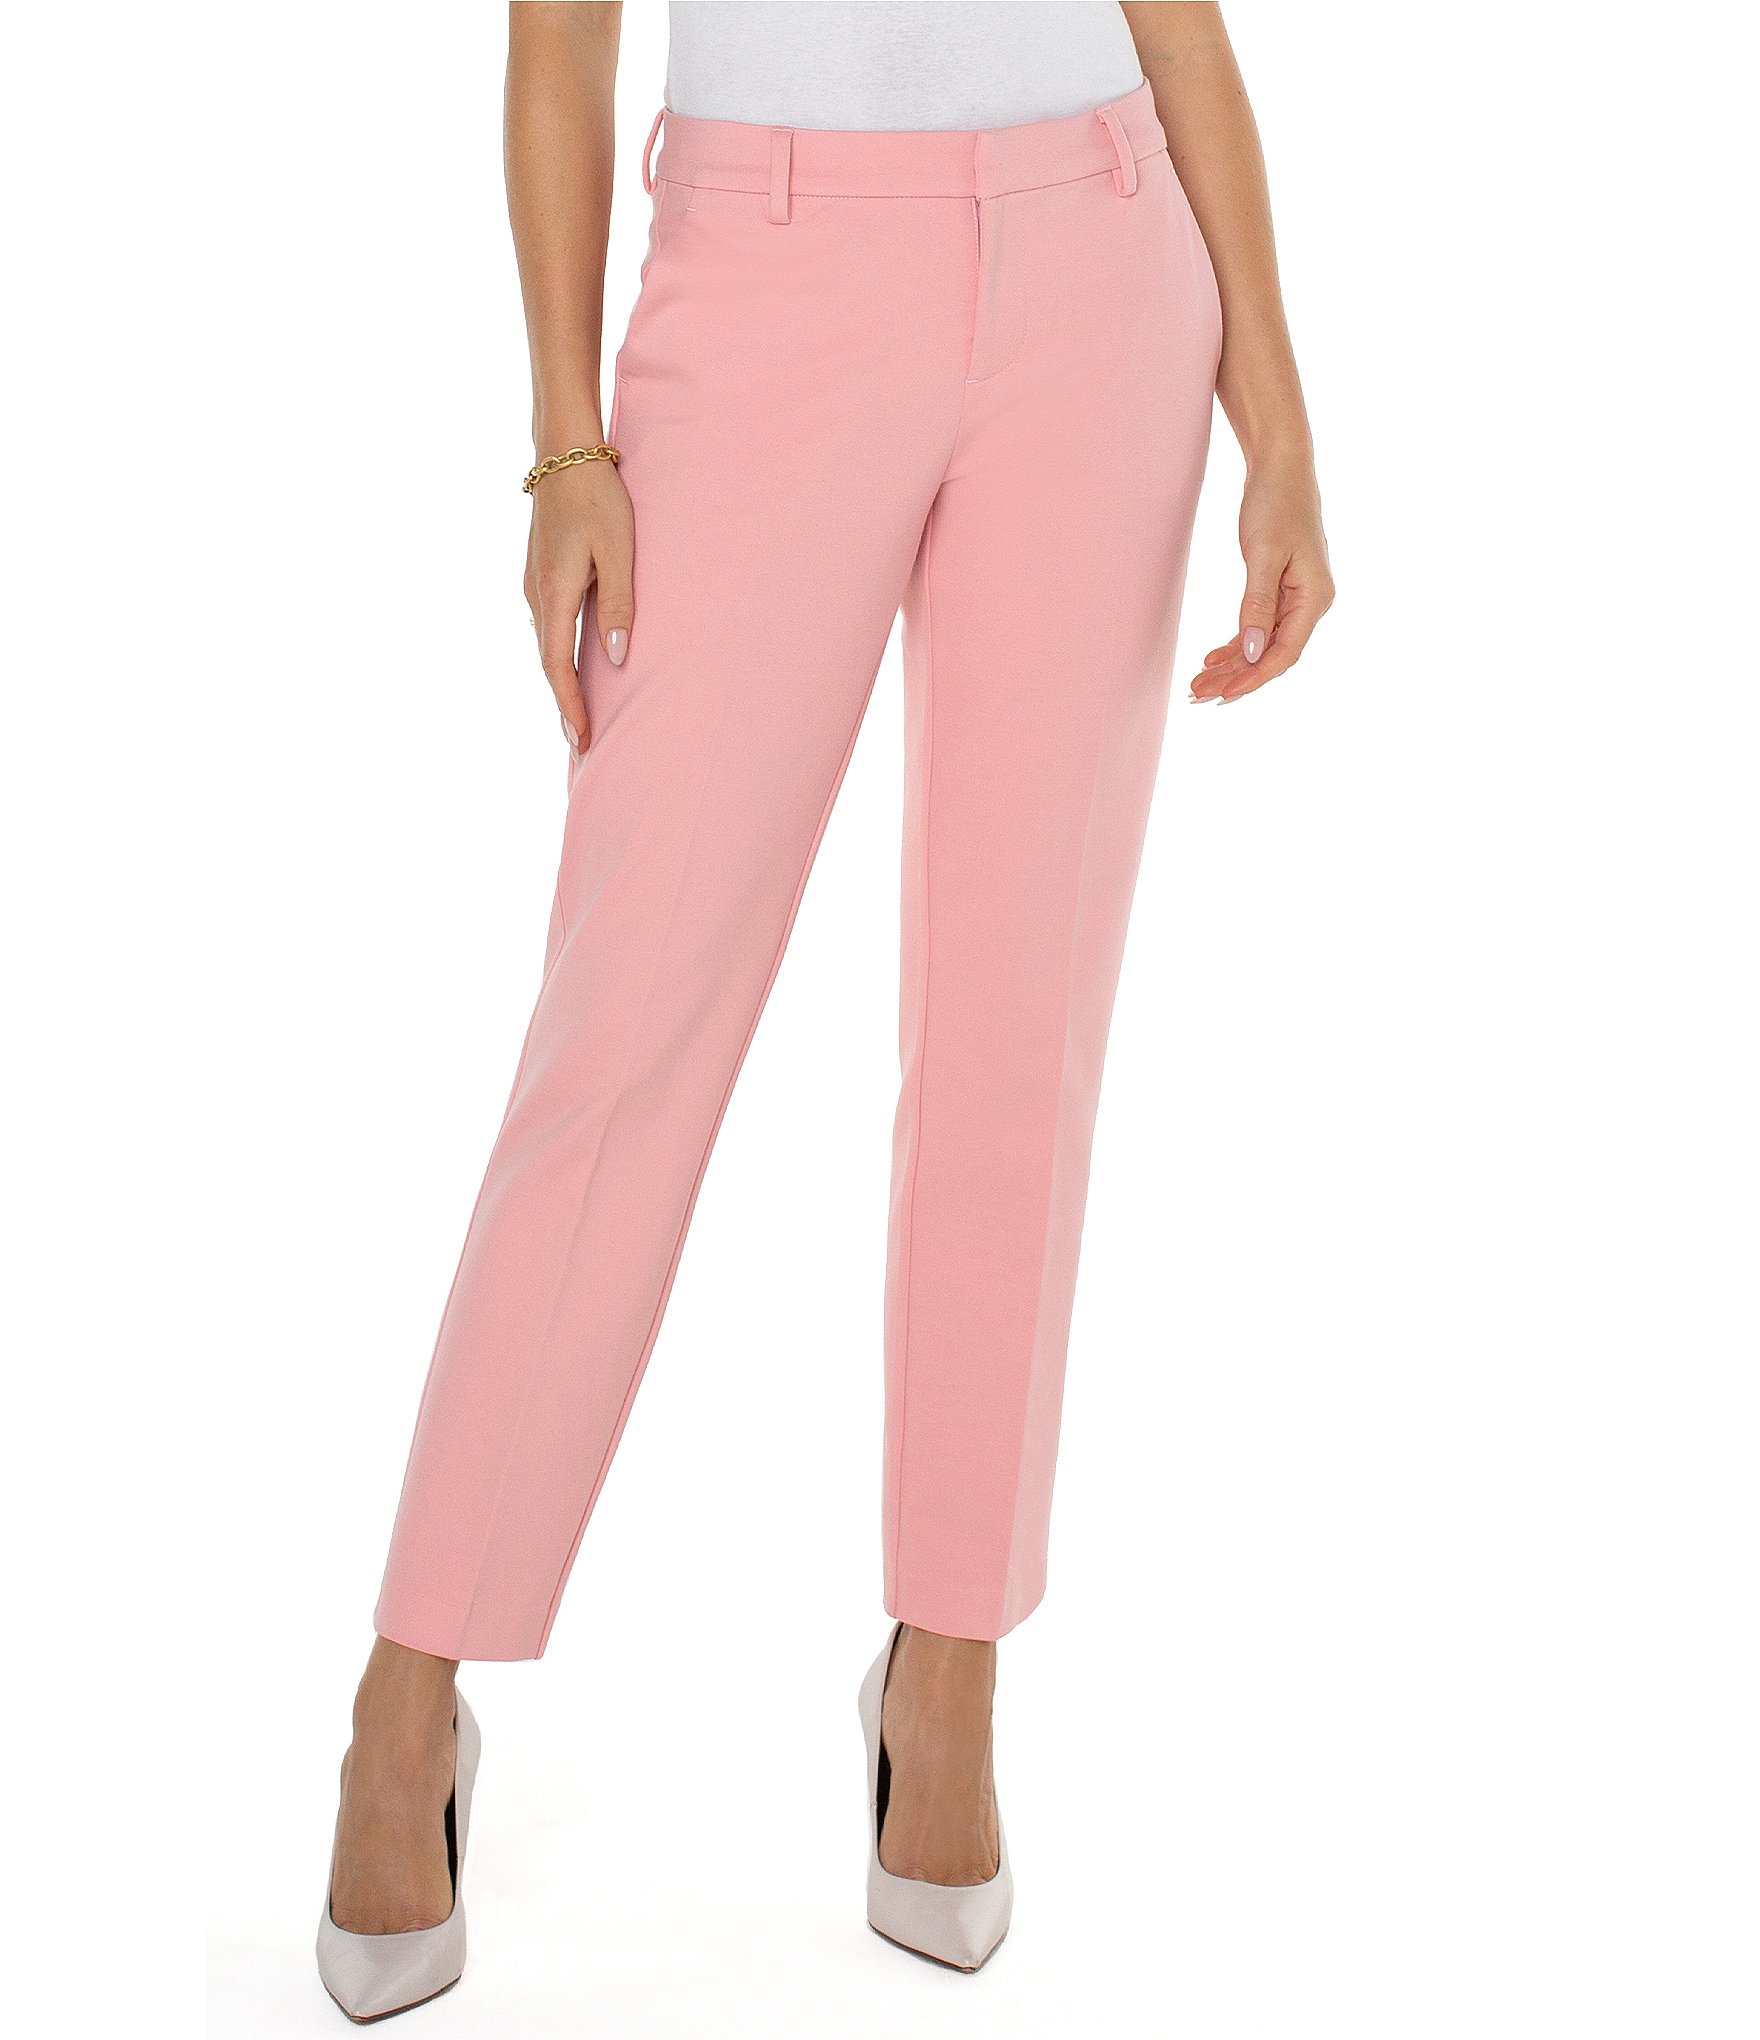 Buy Pink Ankle Length Pant Cotton Samray for Best Price, Reviews